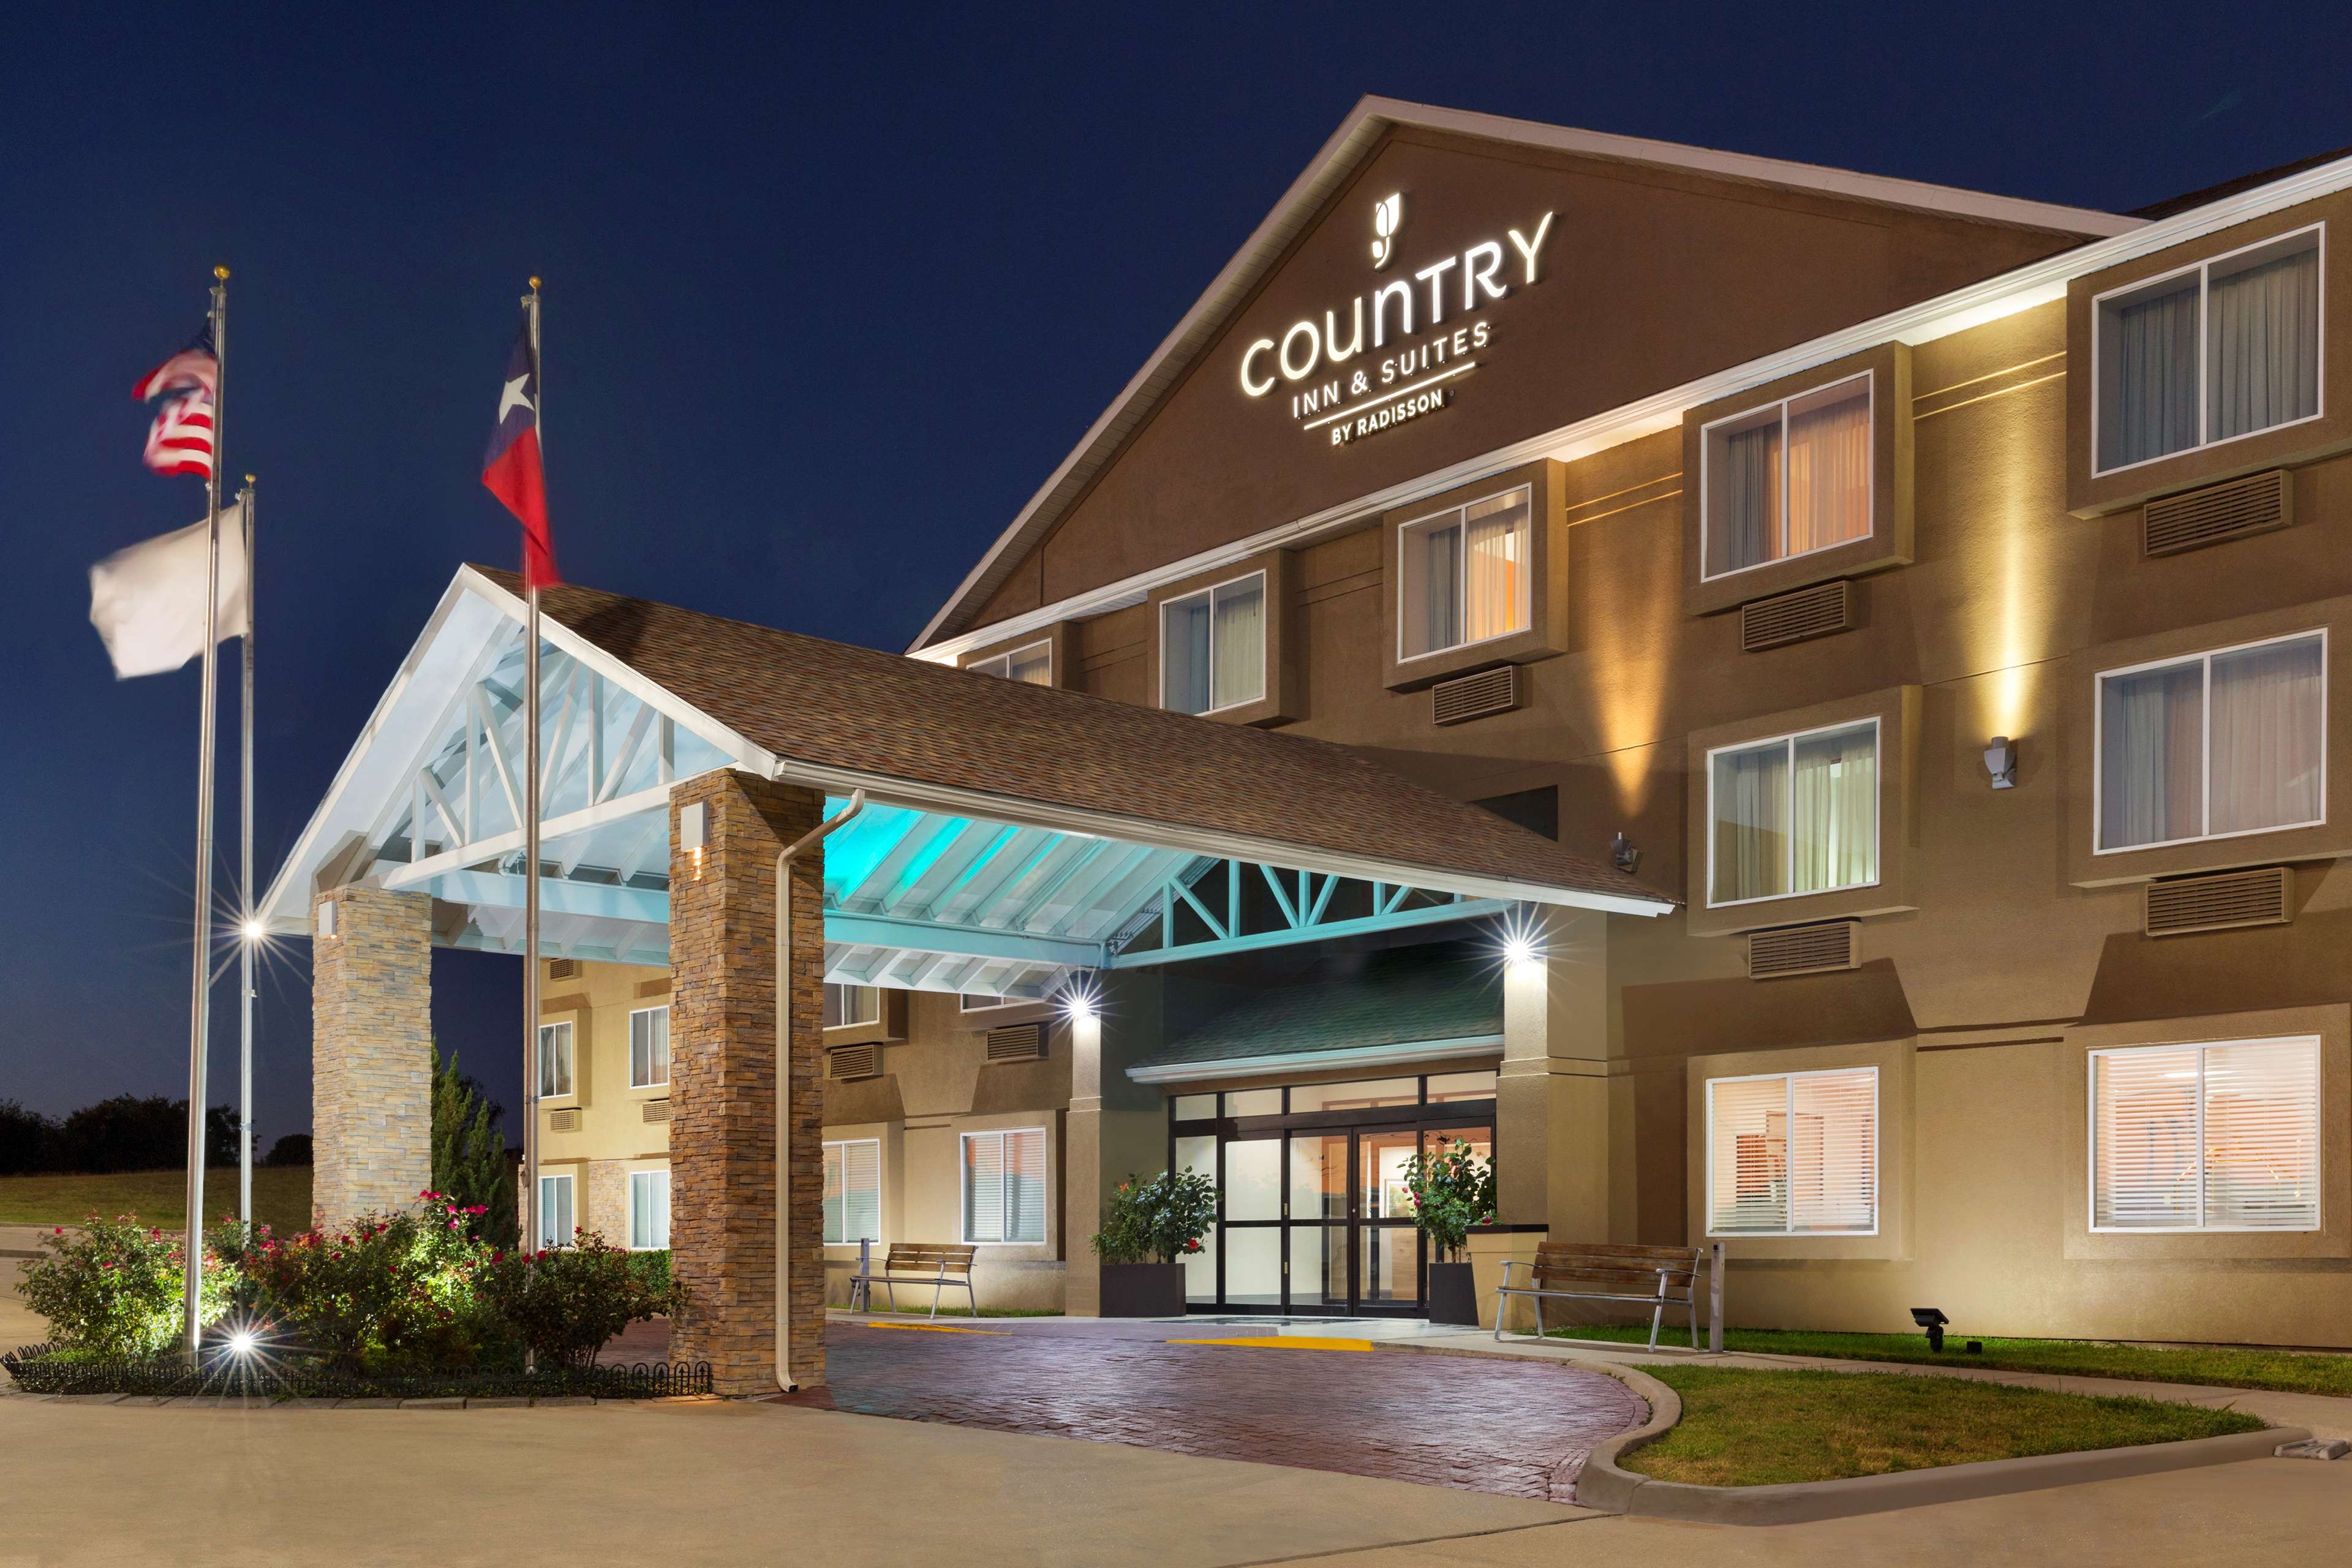 Country Inn & Suites by Radisson, Fort Worth West l-30 NAS JRB Photo